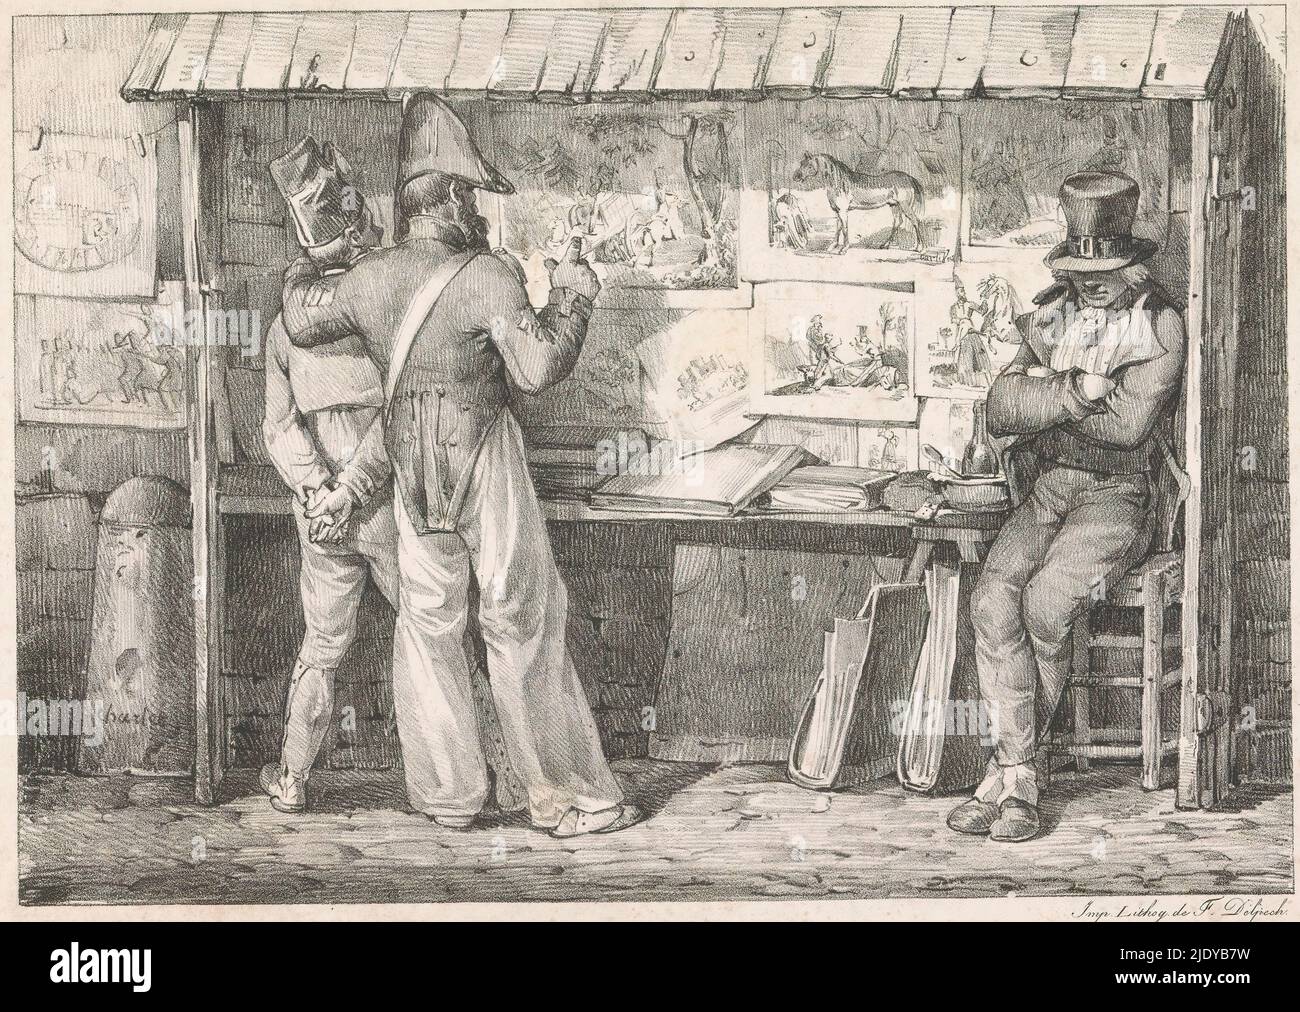 Vendor of Lithographies, Le Marchand de Dessins Lithographiques (title on object), Two soldiers, probably Napoleonic veterans, stand in front of the stall of a vendor of lithographies. Several prints with military themes hang in the stall; albums are on the table. The print dealer leans relaxed against a chair, with his arms crossed and his hat over his eyes., print maker: Nicolas Toussaint Charlet, (mentioned on object), printer: François Séraphin Delpech, (mentioned on object), Paris, Jun-1818 - Dec-1819, paper, height 310 mm × width 408 mm Stock Photo